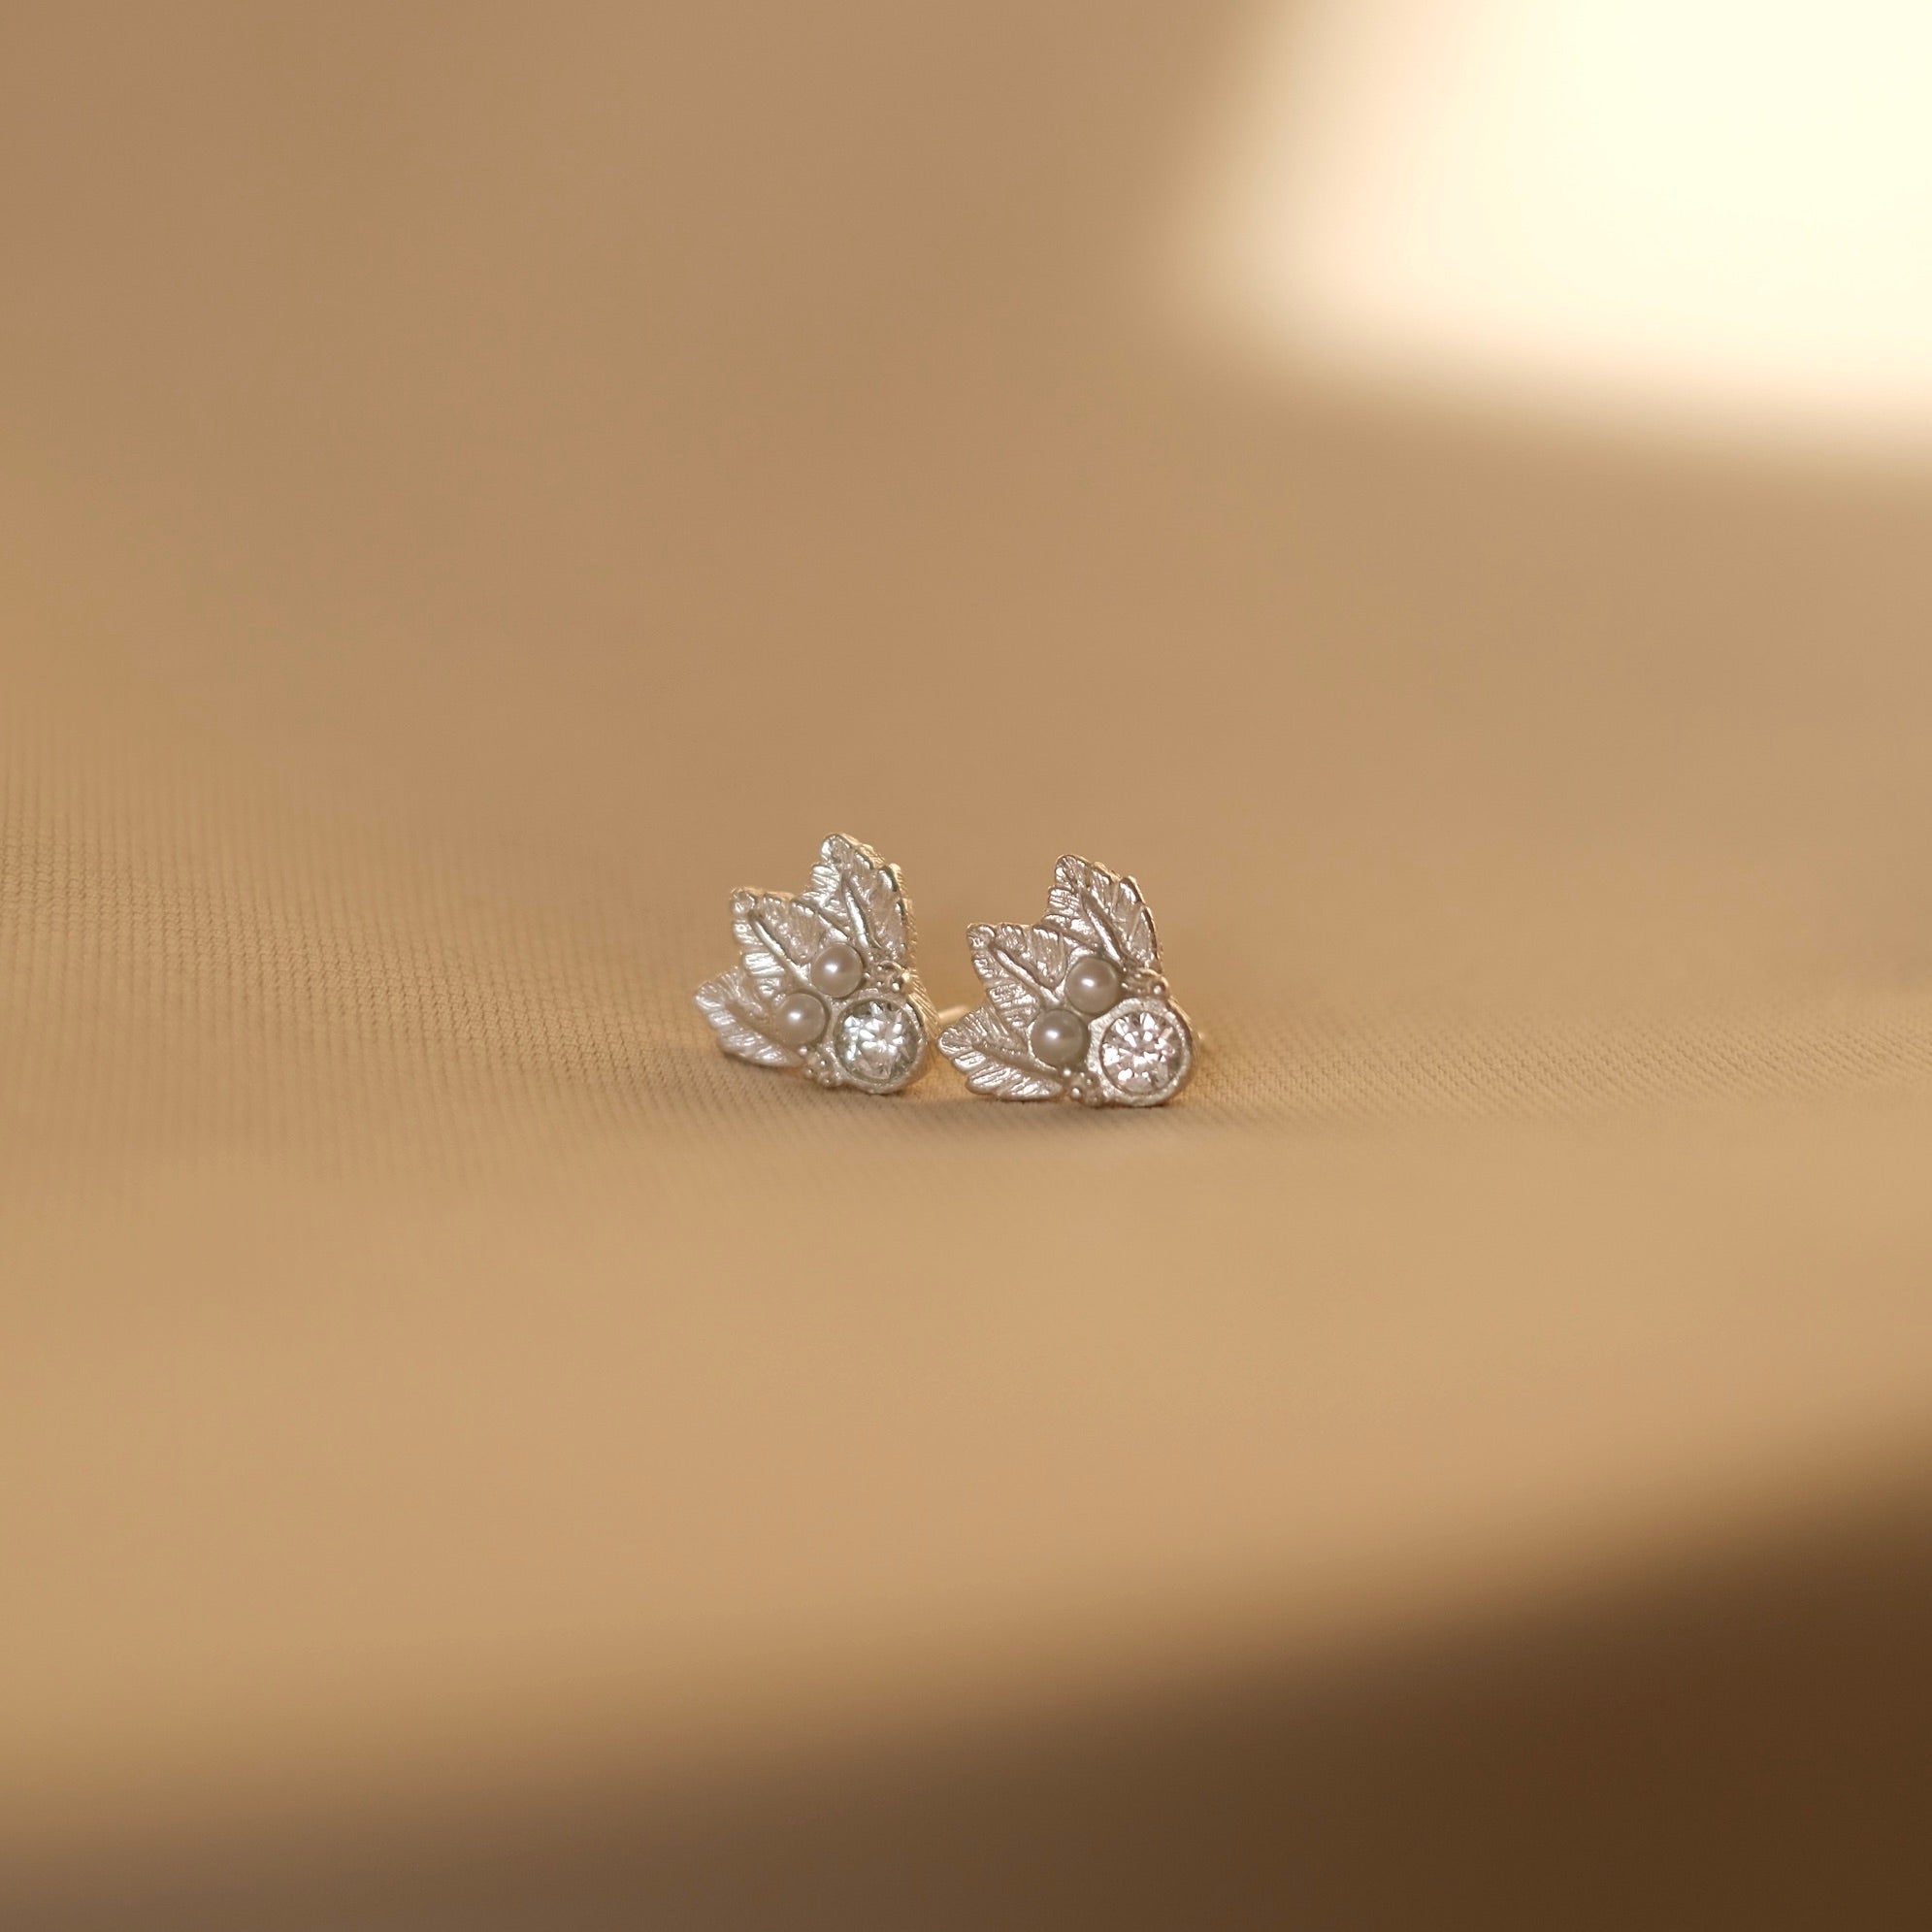 A pair of luxurious Cremilde Bispo Jewellery Muse I silver stud earrings on a table.